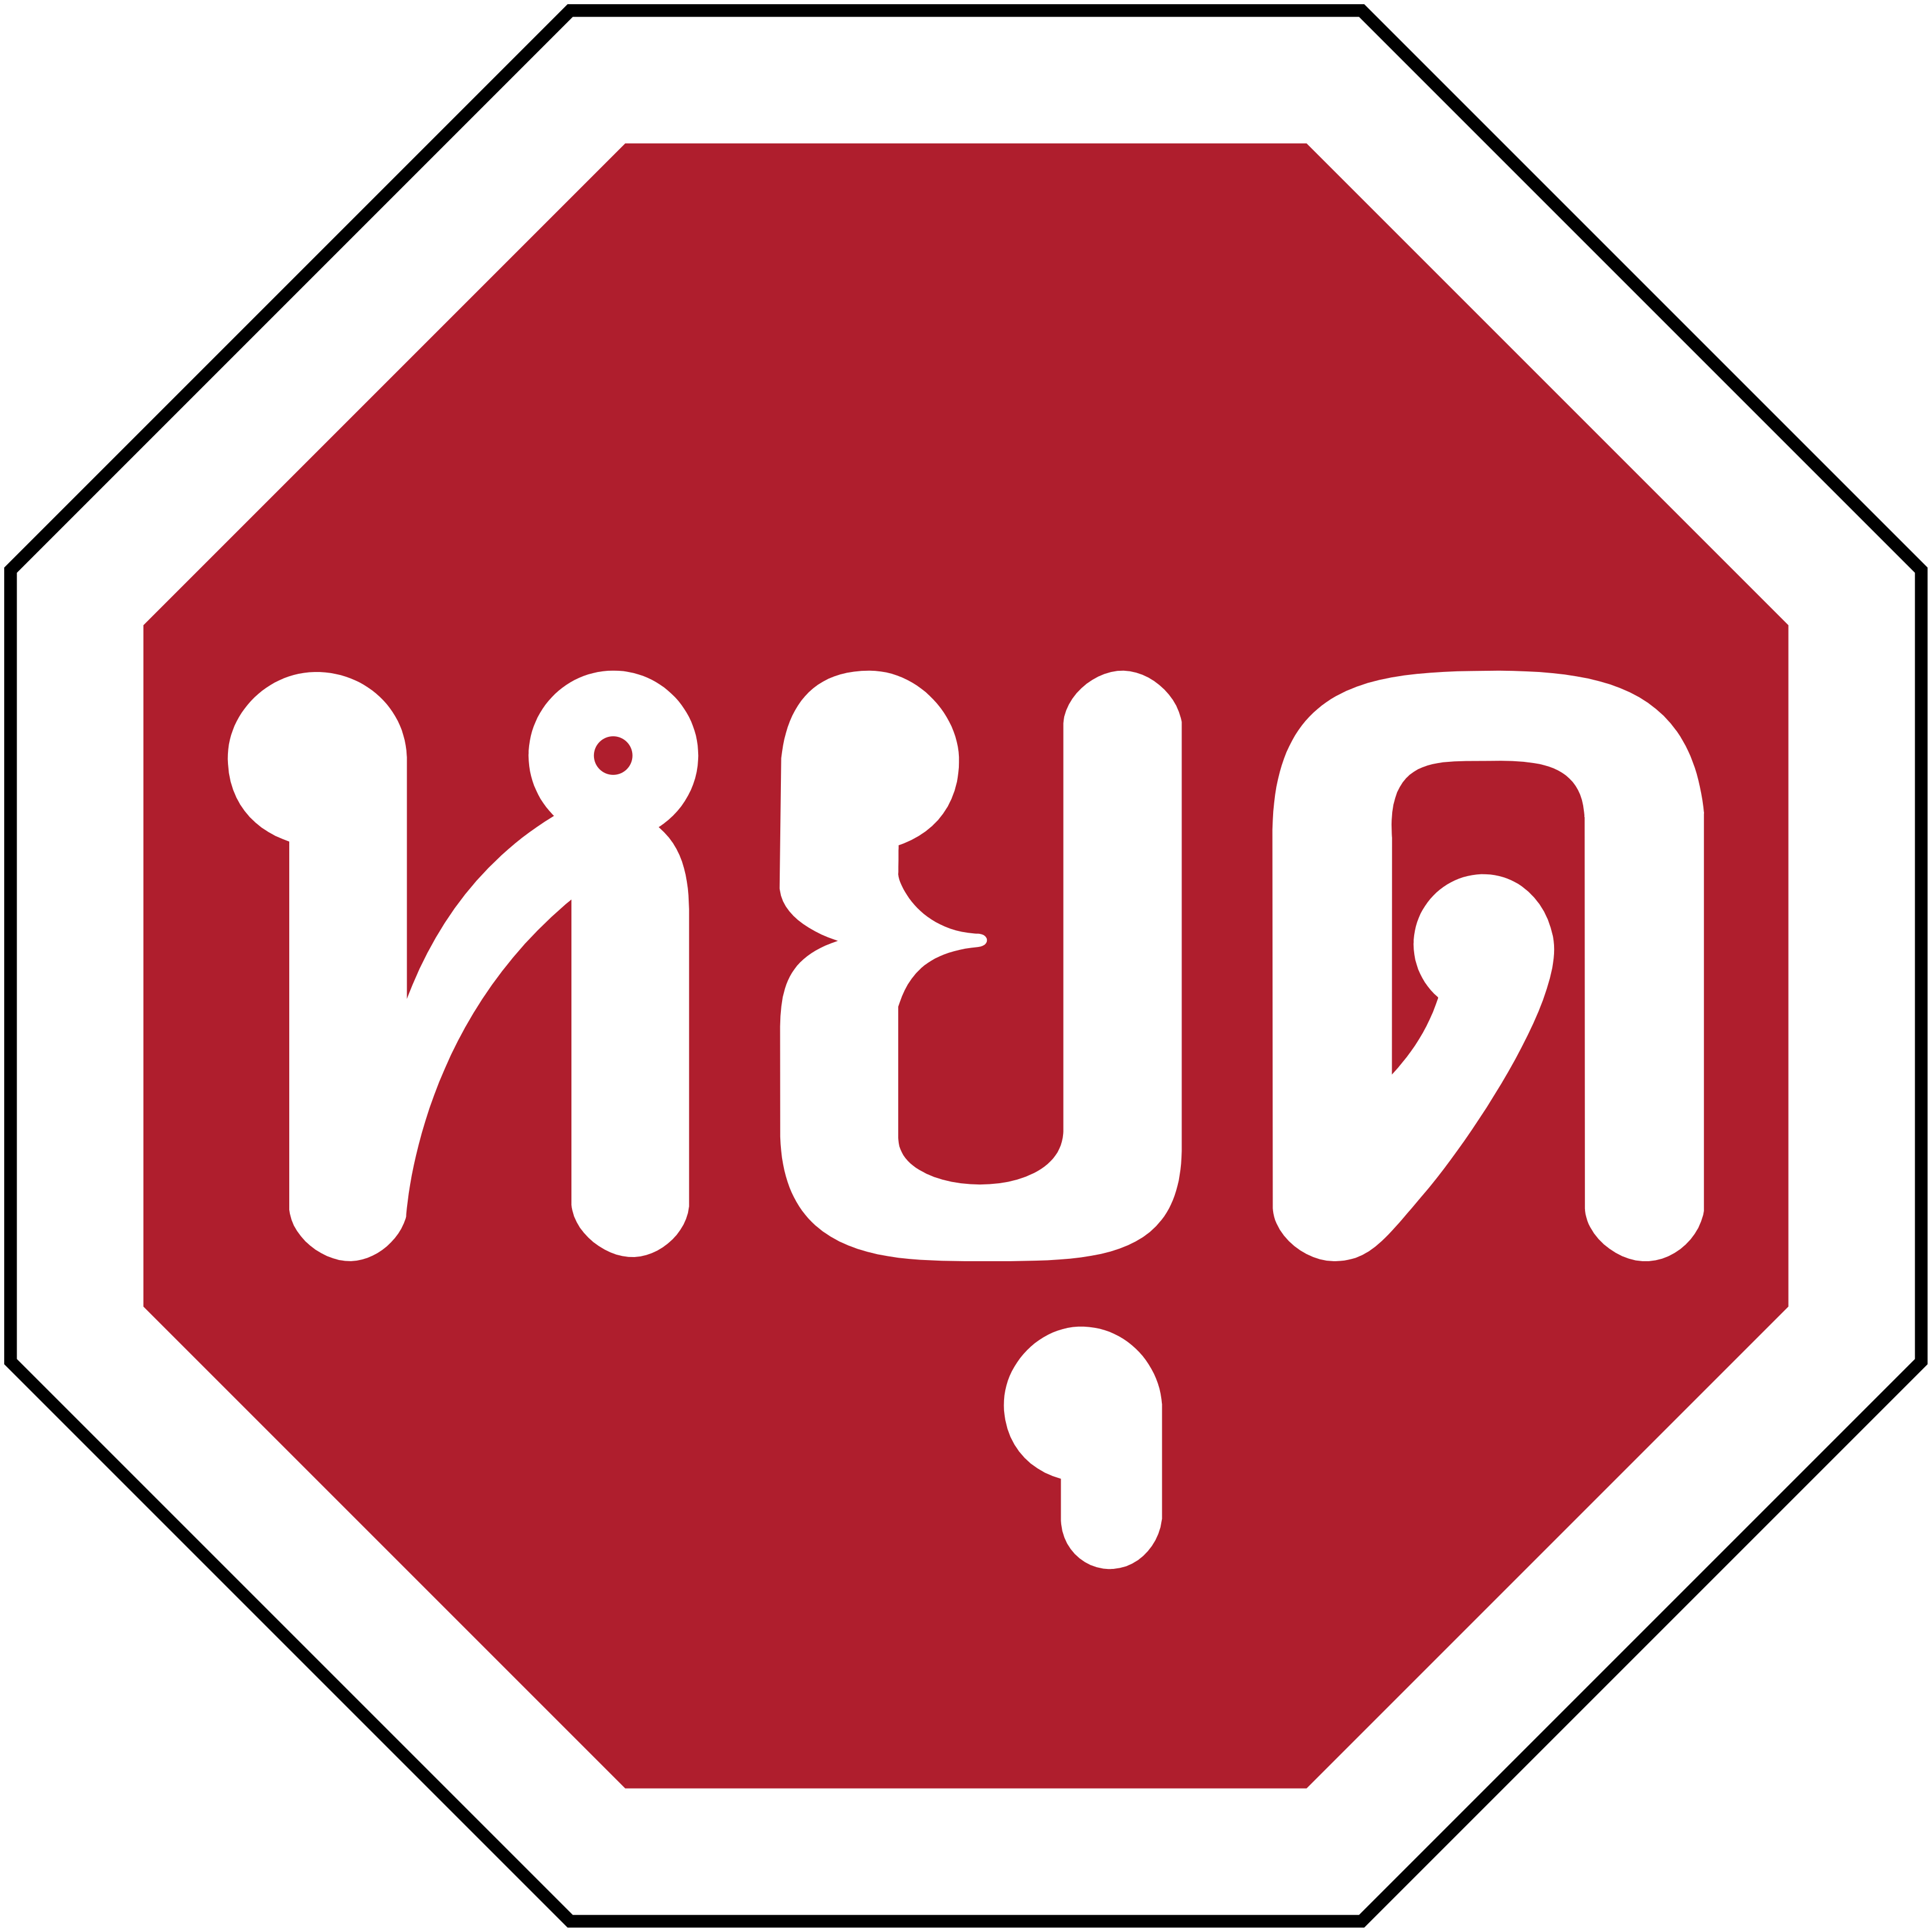 Stop sign in Thailand